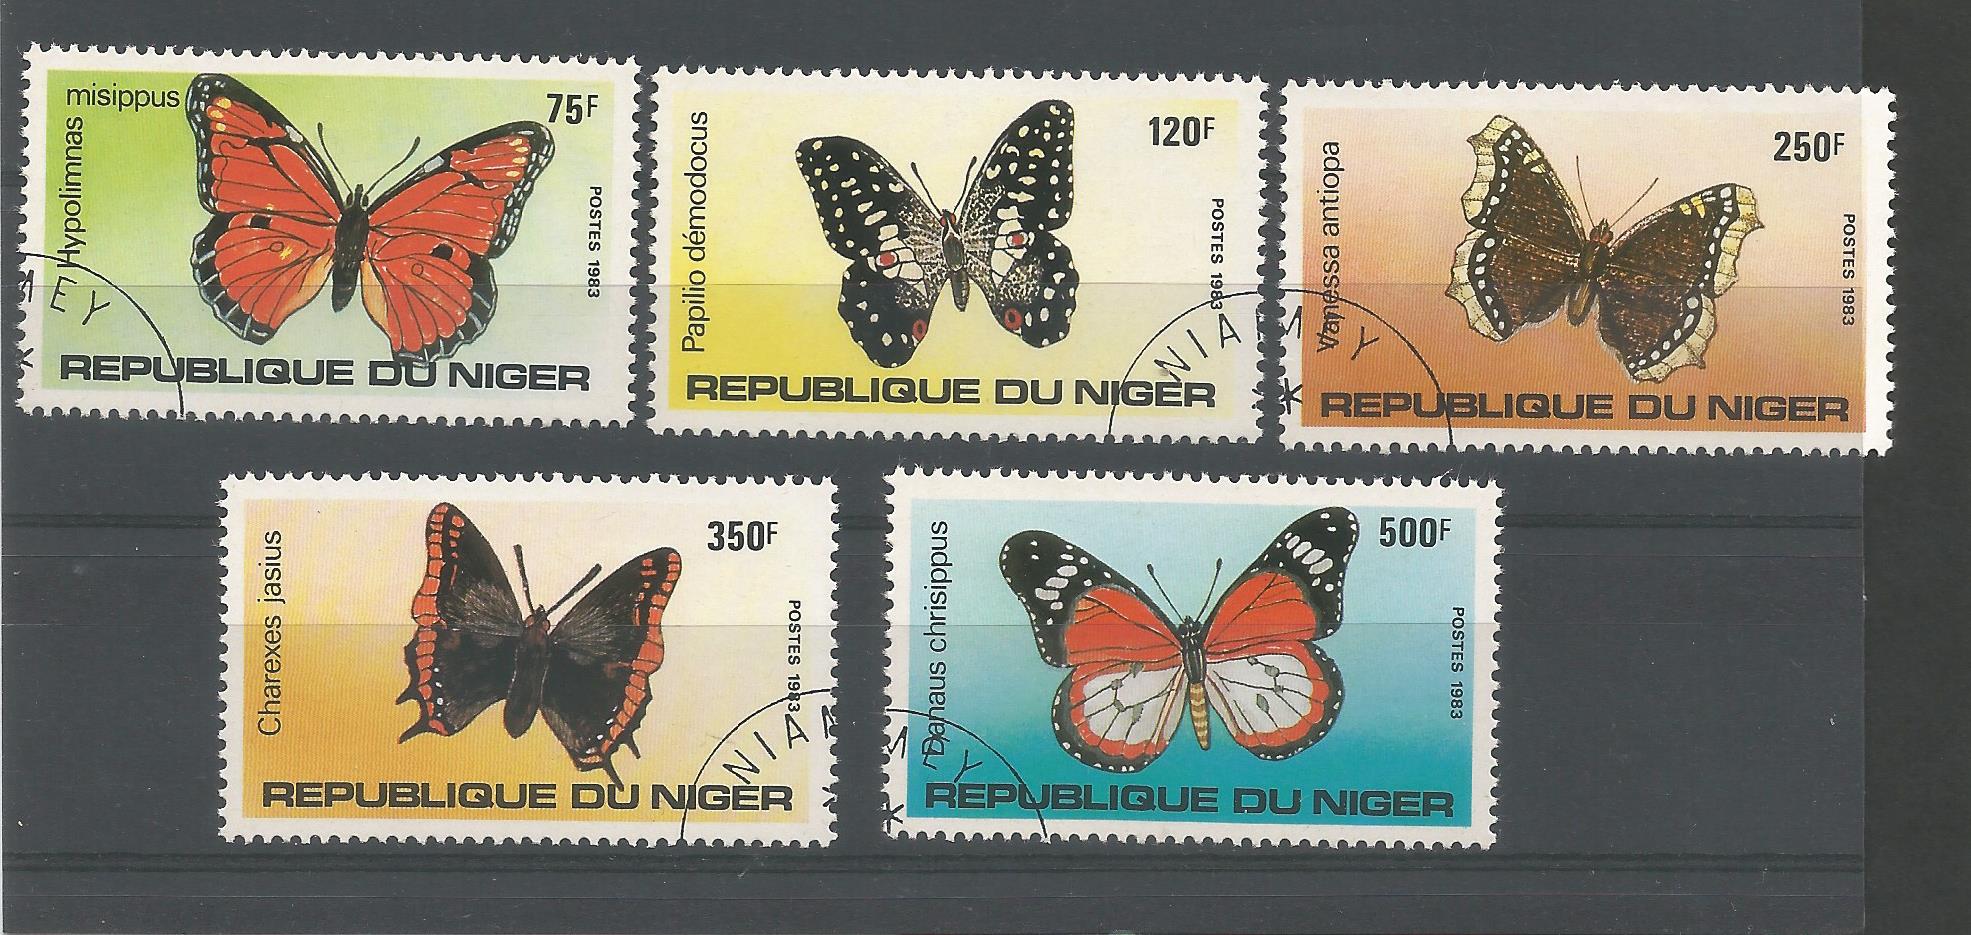 51111 - NIGER - 1983 - Farfalle - Serie compl. 5 val. timbrati - Michel : 867/71 - Yvert : 625/29 - (NGR005)